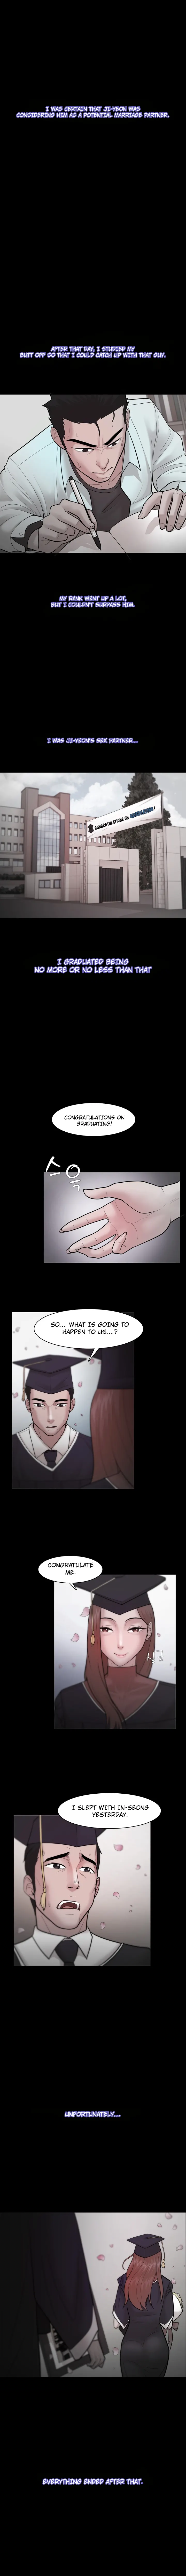 Loser (Team 201) - Chapter 23 Page 6